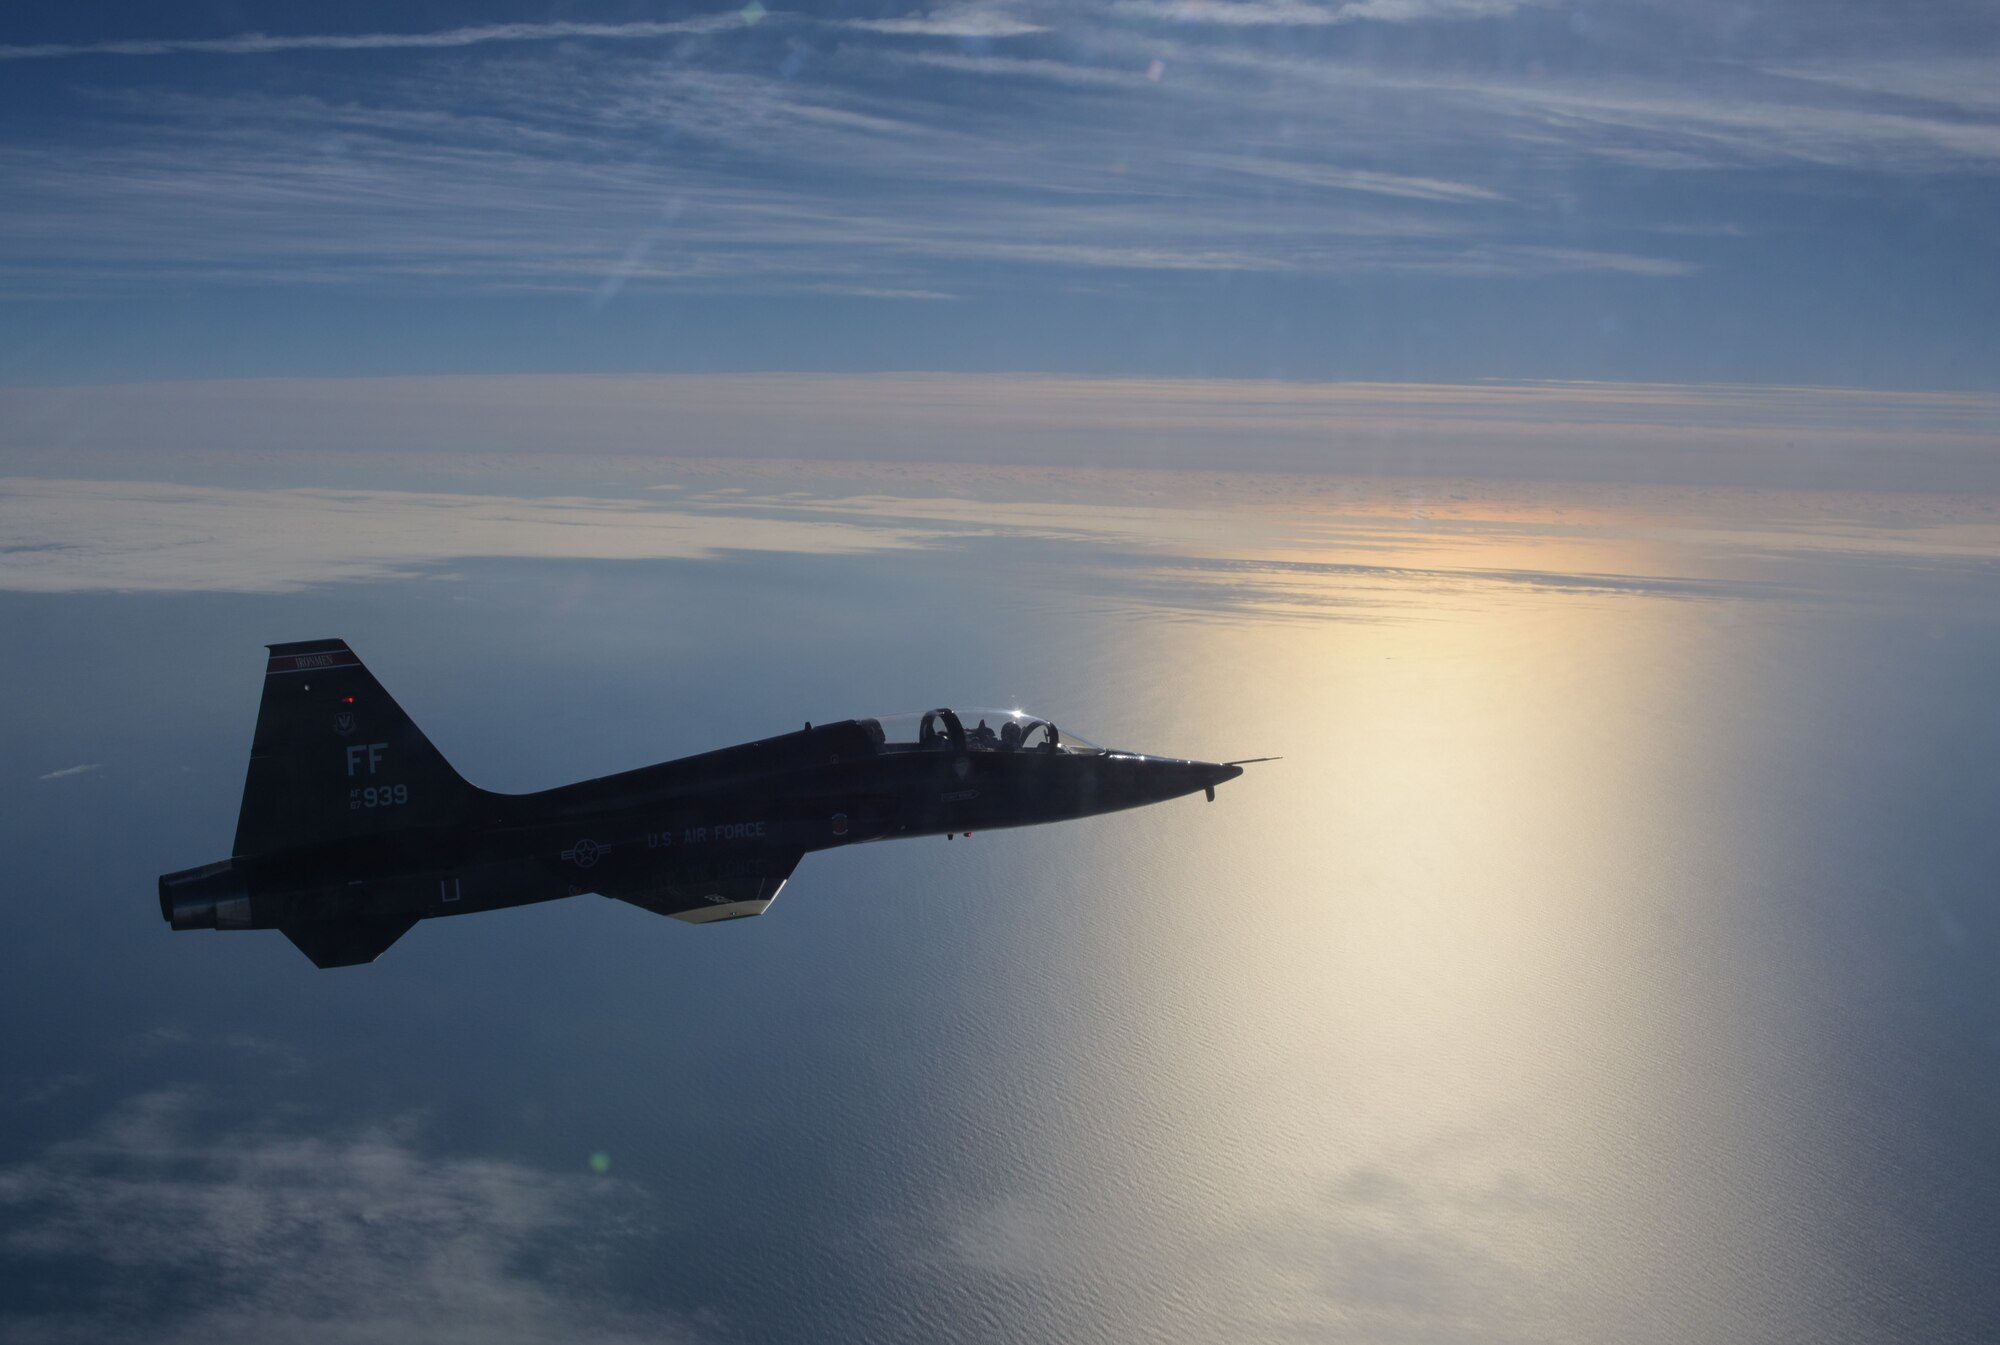 A pilot assigned to the 71st Fighter Training Squadron flies a T-38 Talon over the Atlantic Ocean, Jan. 24, 2018. The T-38 Talon is a twin-engine, high-altitude supersonic pilot trainer aircraft. As the world's first supersonic trainer, the T-38 first flew in 1959 and continues to be used to this day. (U.S. Air Force Photo by Staff Sgt. Carlin Leslie)